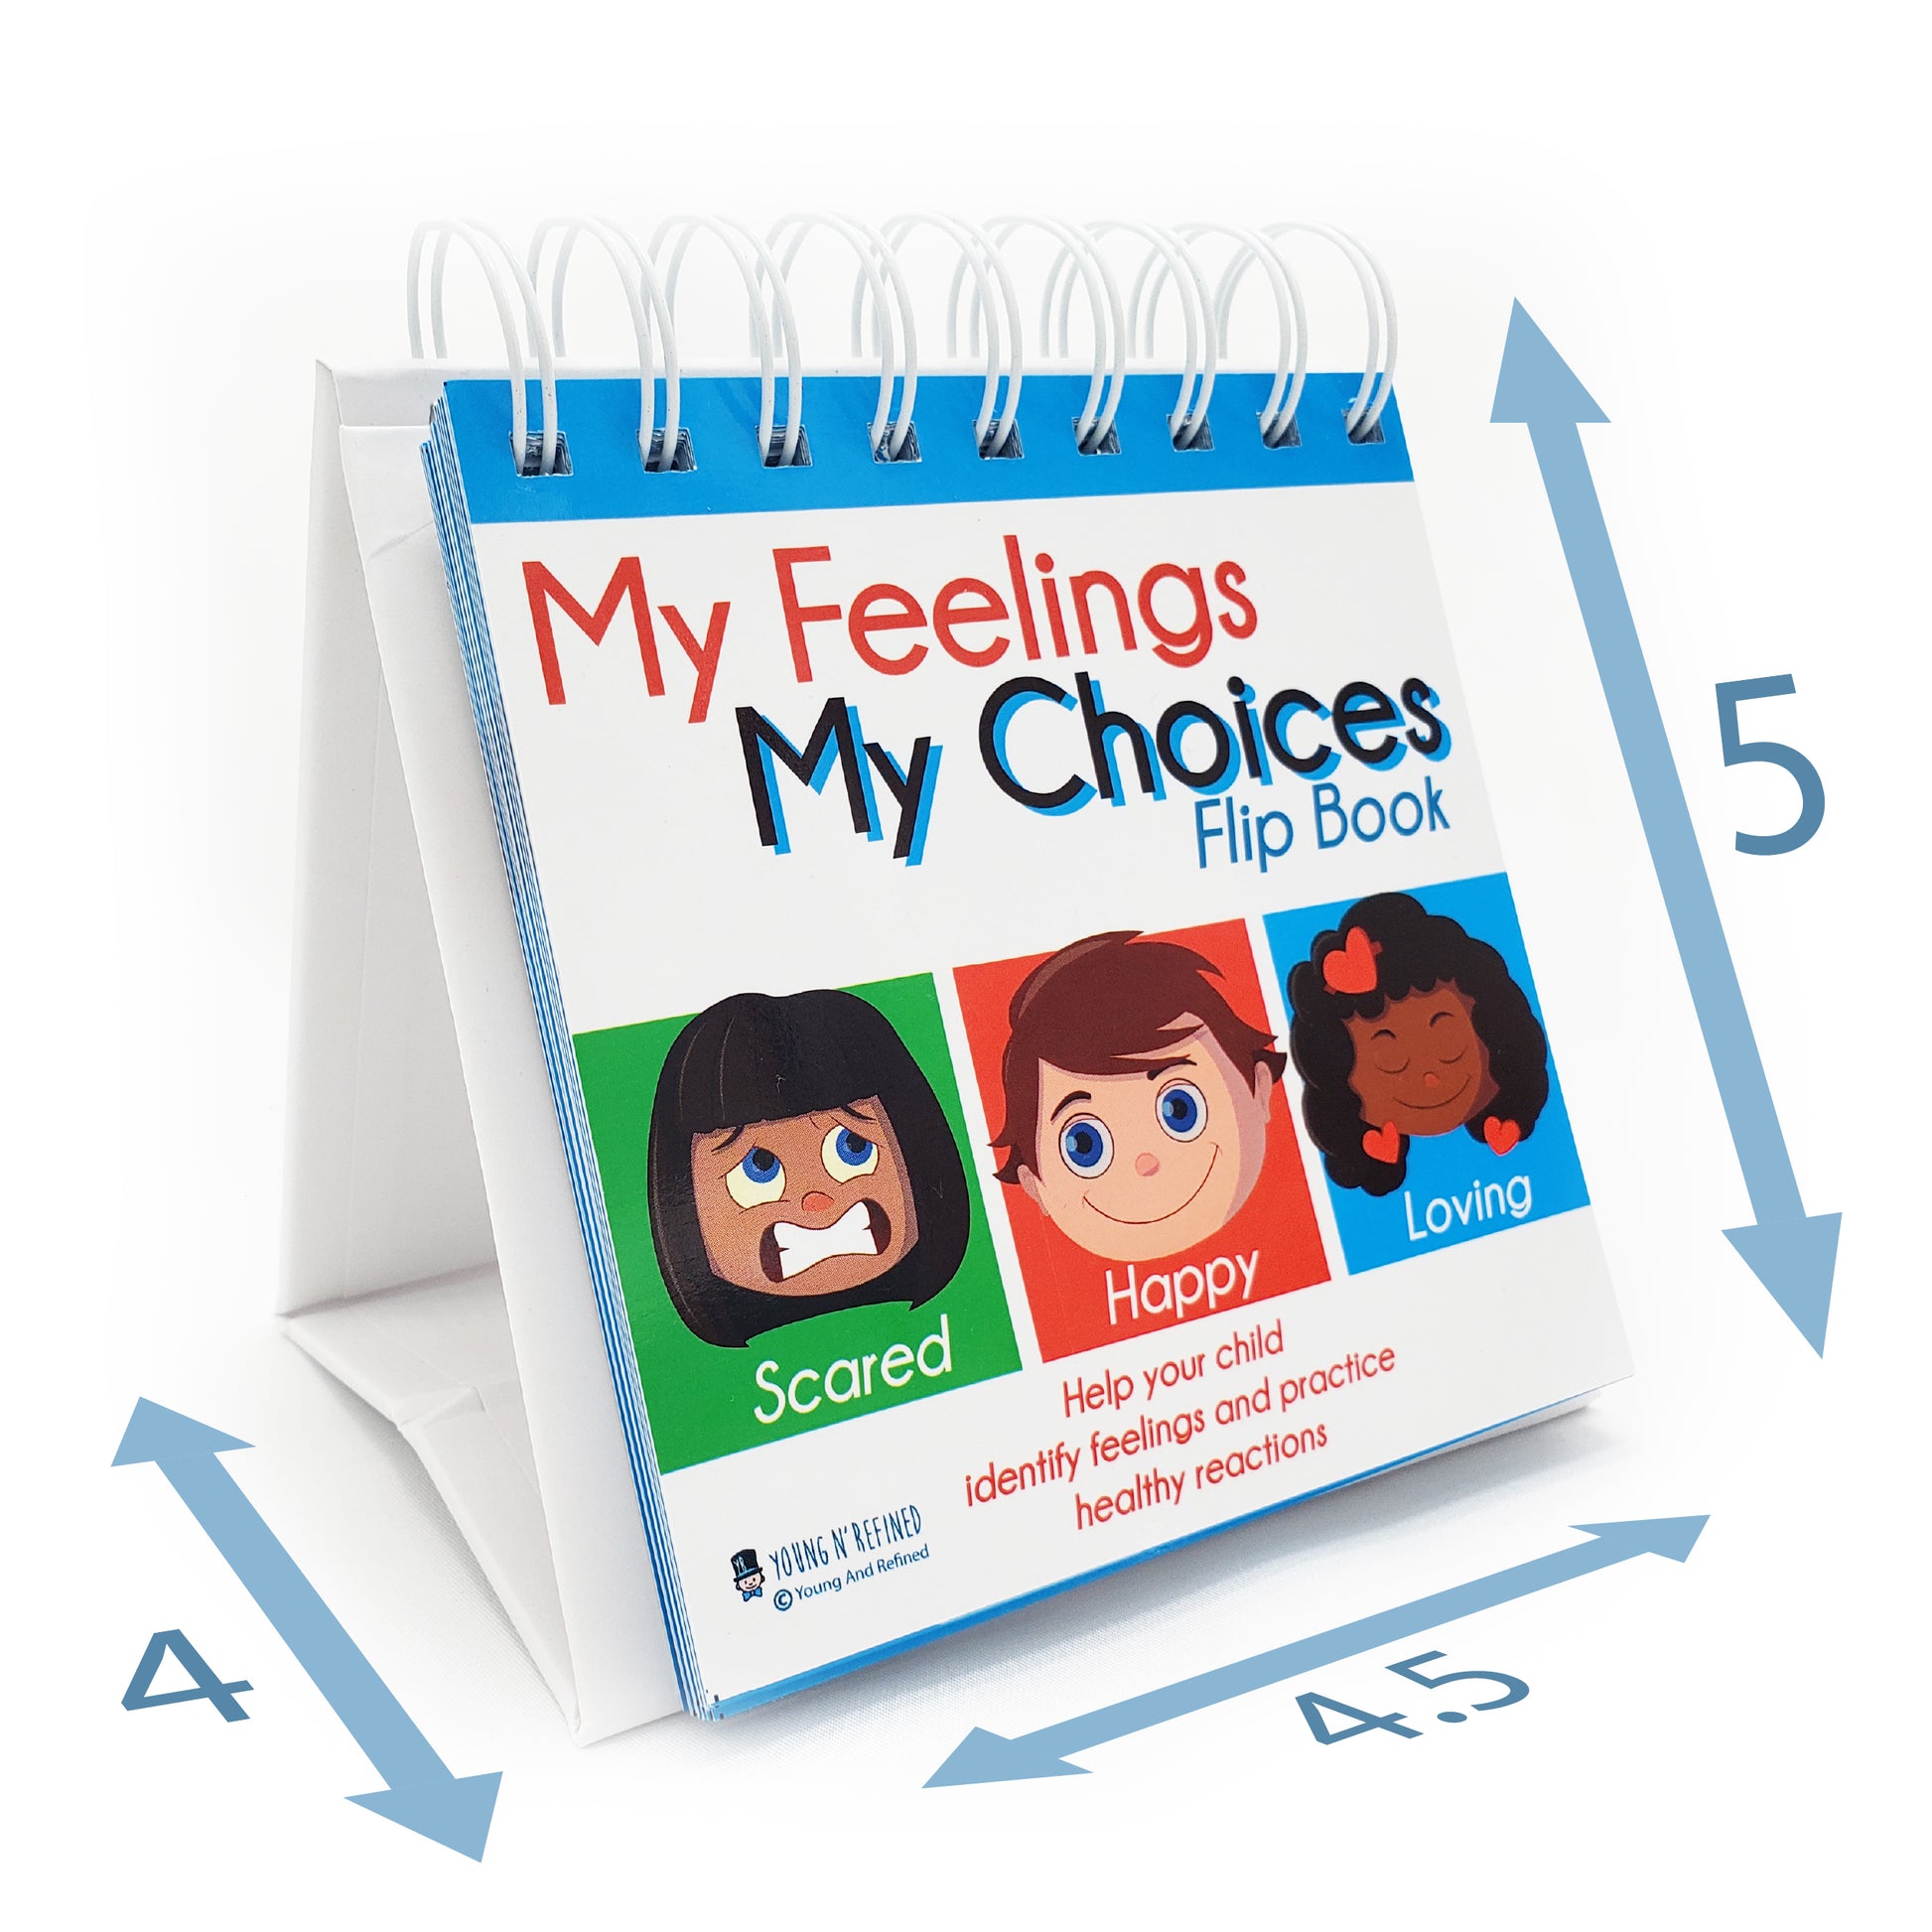 My Feelings My Choices Flip Book Tool for Teaching Handling 22 Different Emotions for Children (5 inchx6.5 inch) Young N Refined, Size: 5X6.5, Other